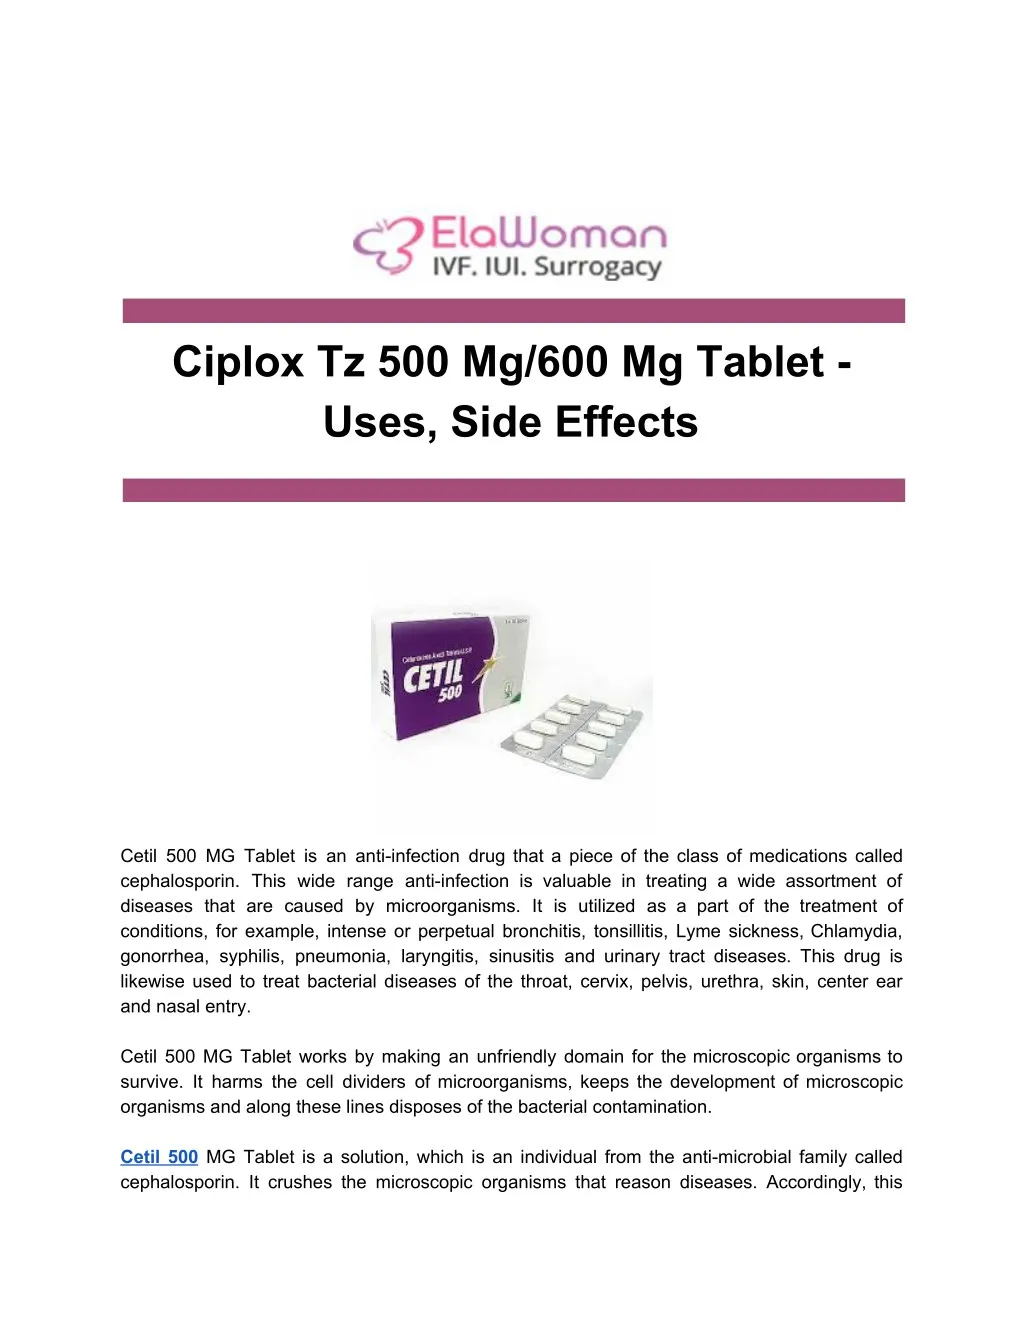 ciplox tz 500 mg 600 mg tablet uses side effects